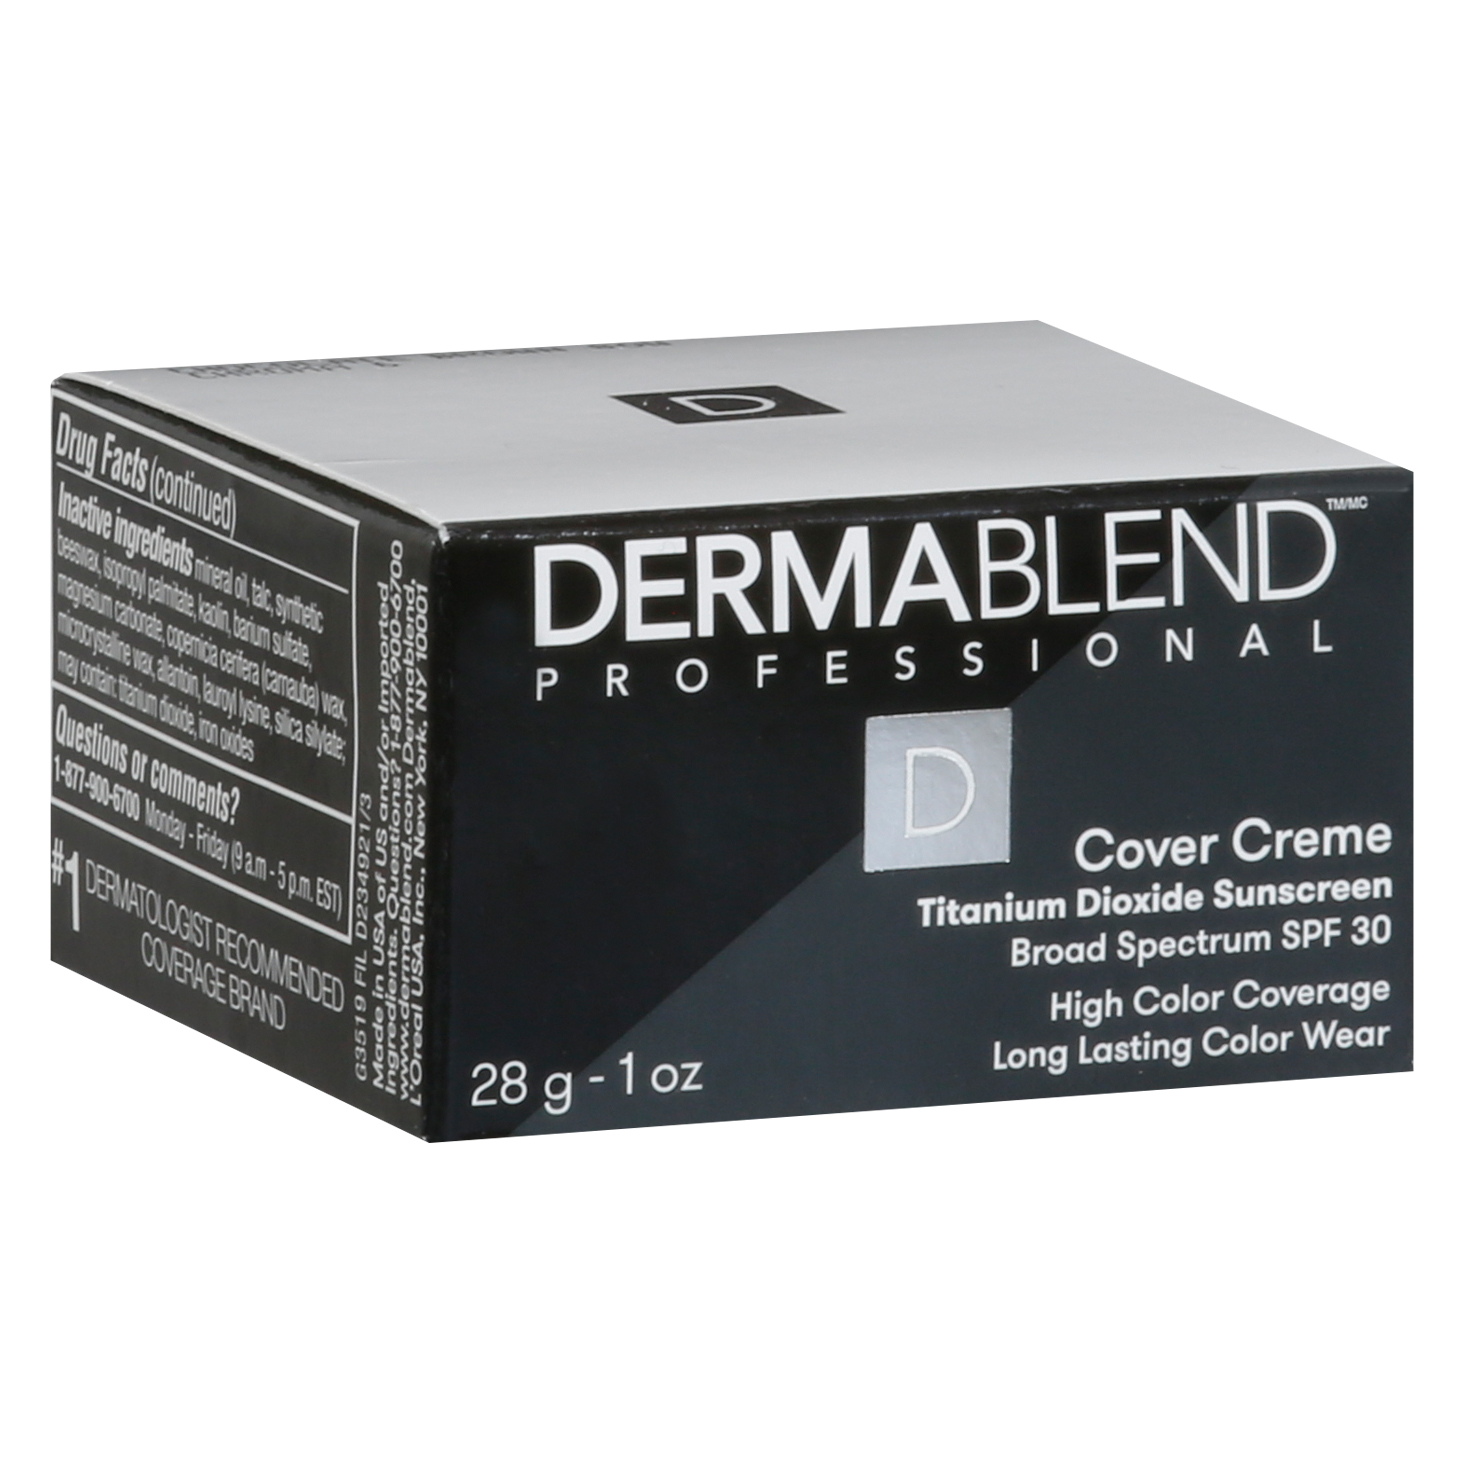 Dermablend Cover Creme Foundation SPF 30-Chocolate Brown (Chroma 6) - image 3 of 3